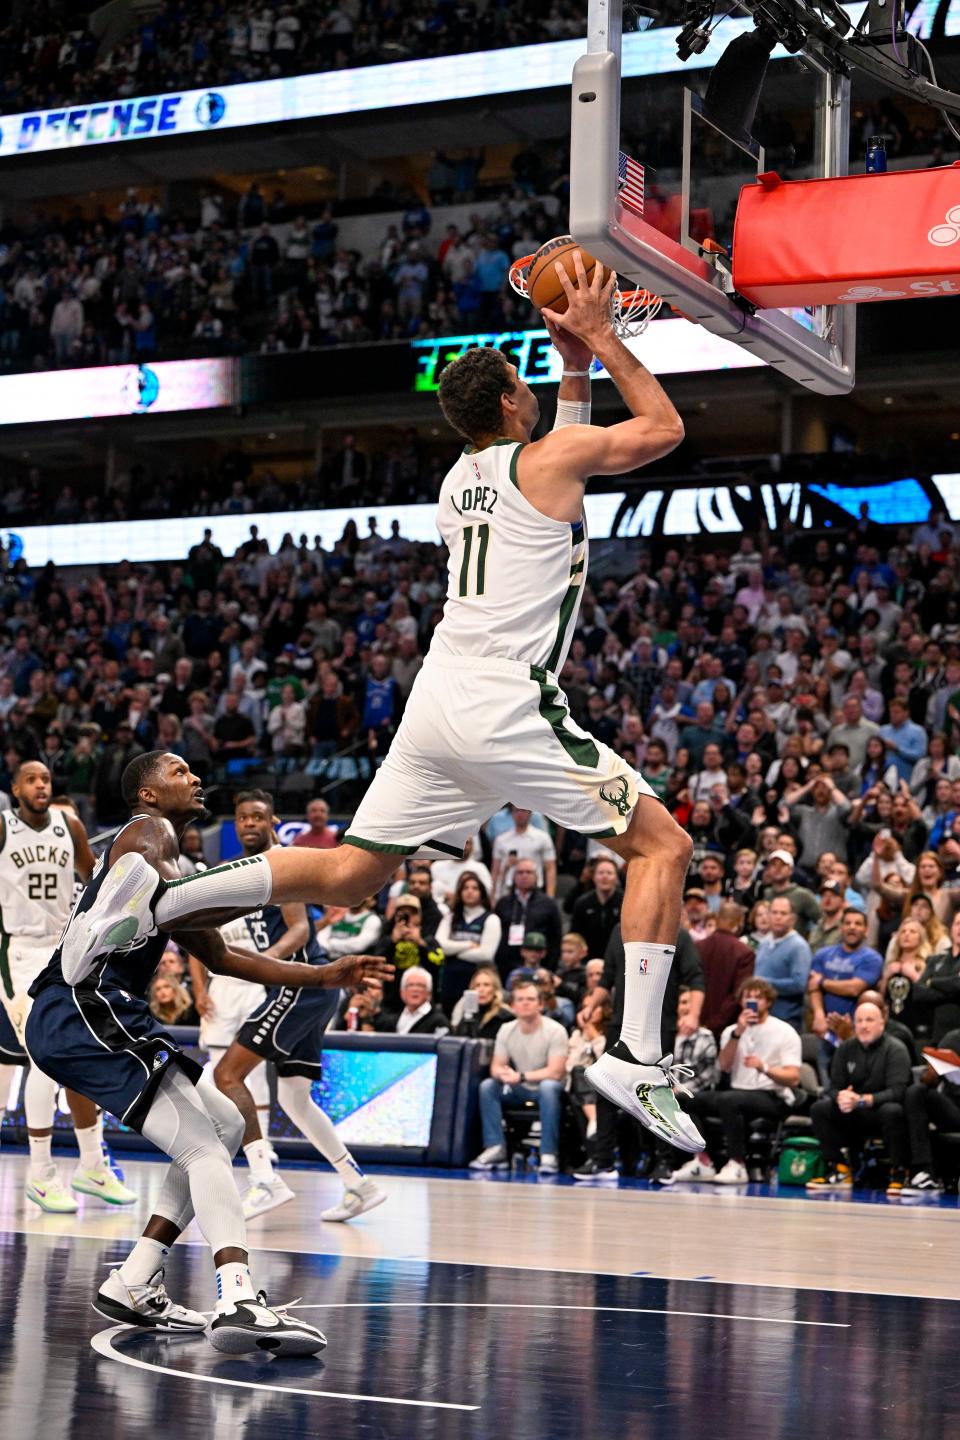 Bucks center Brook Lopez goes up for the winning basket with 7.1 seconds left in the game against the Mavericks on Friday night.